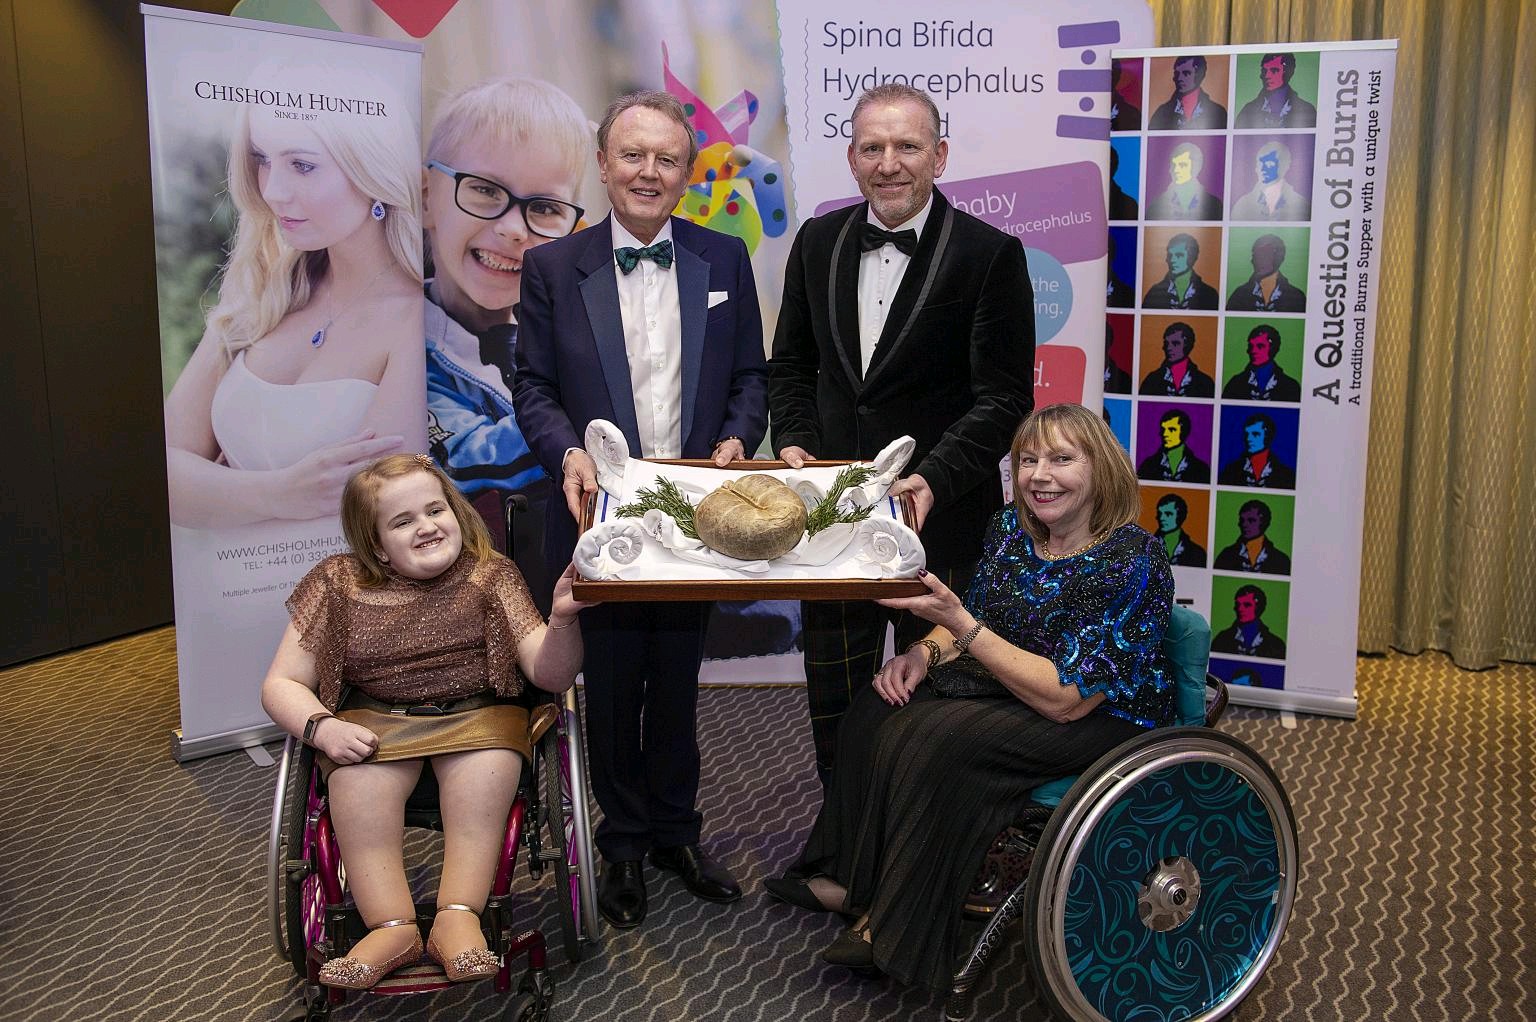 Image of Harry Brown with members of Spina Bifida Hydrocephalus Scotland (SBH Scotland) at their annual Burns' event